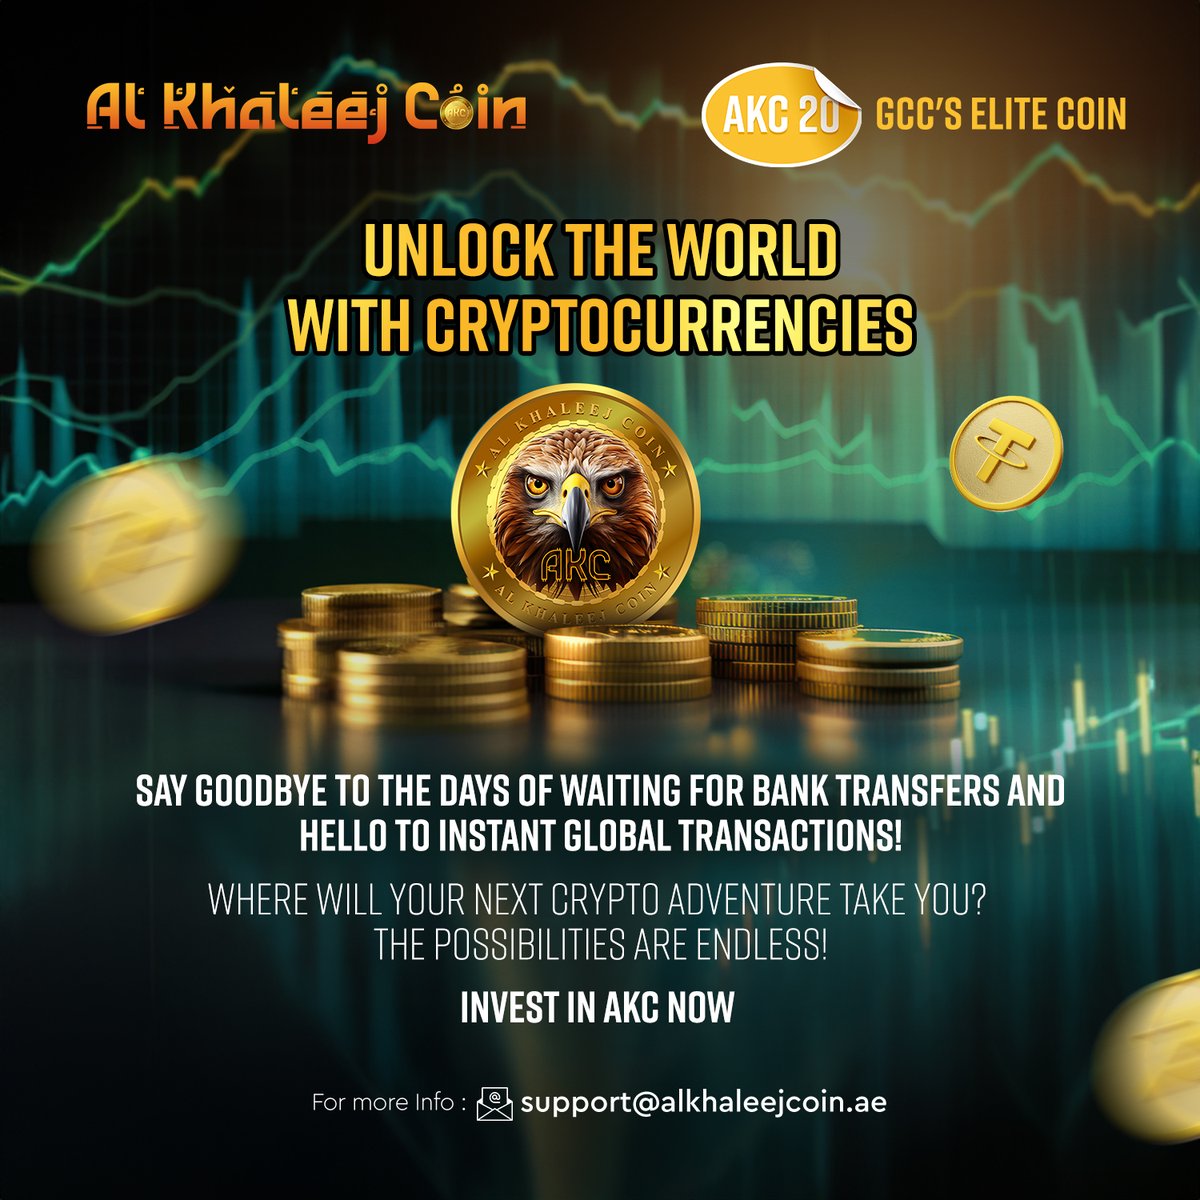 Unlock the world with cryptocurrencies! Say goodbye to waiting for bank transfers and hello to instant global transactions with AKC! 💸✈️  #Crypto #AKC #alkhaleejcoin #elitecoin #gcccoin #coin2024